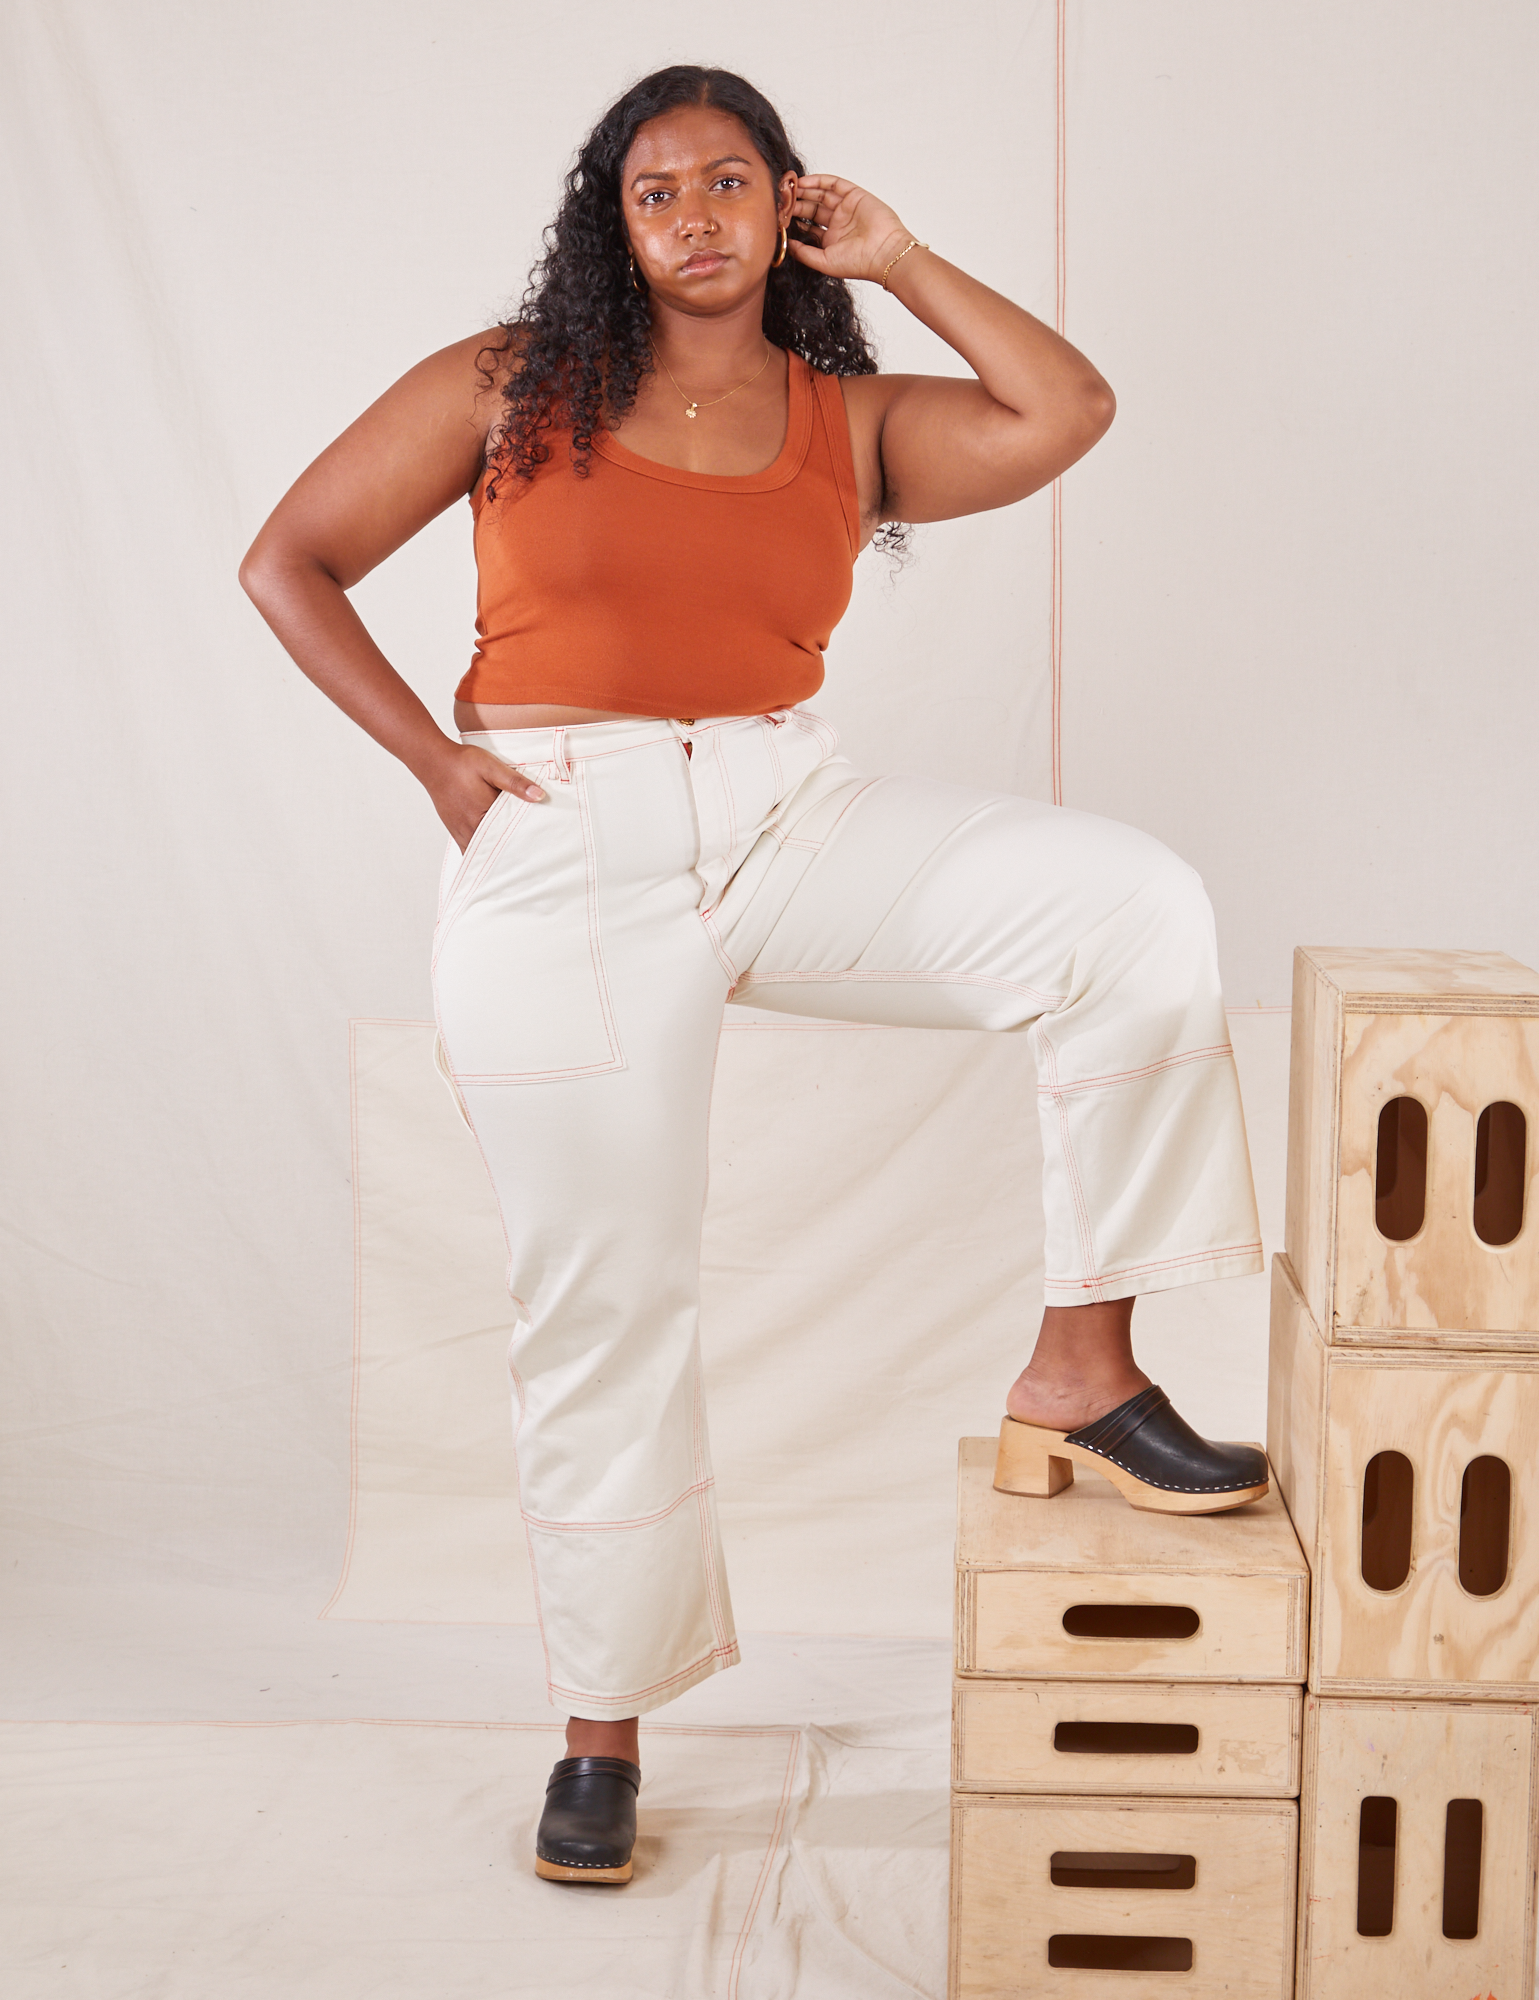 Meghna is wearing Carpenter Jeans in Vintage Tee Off-White and burnt terracotta Cropped Tank Top